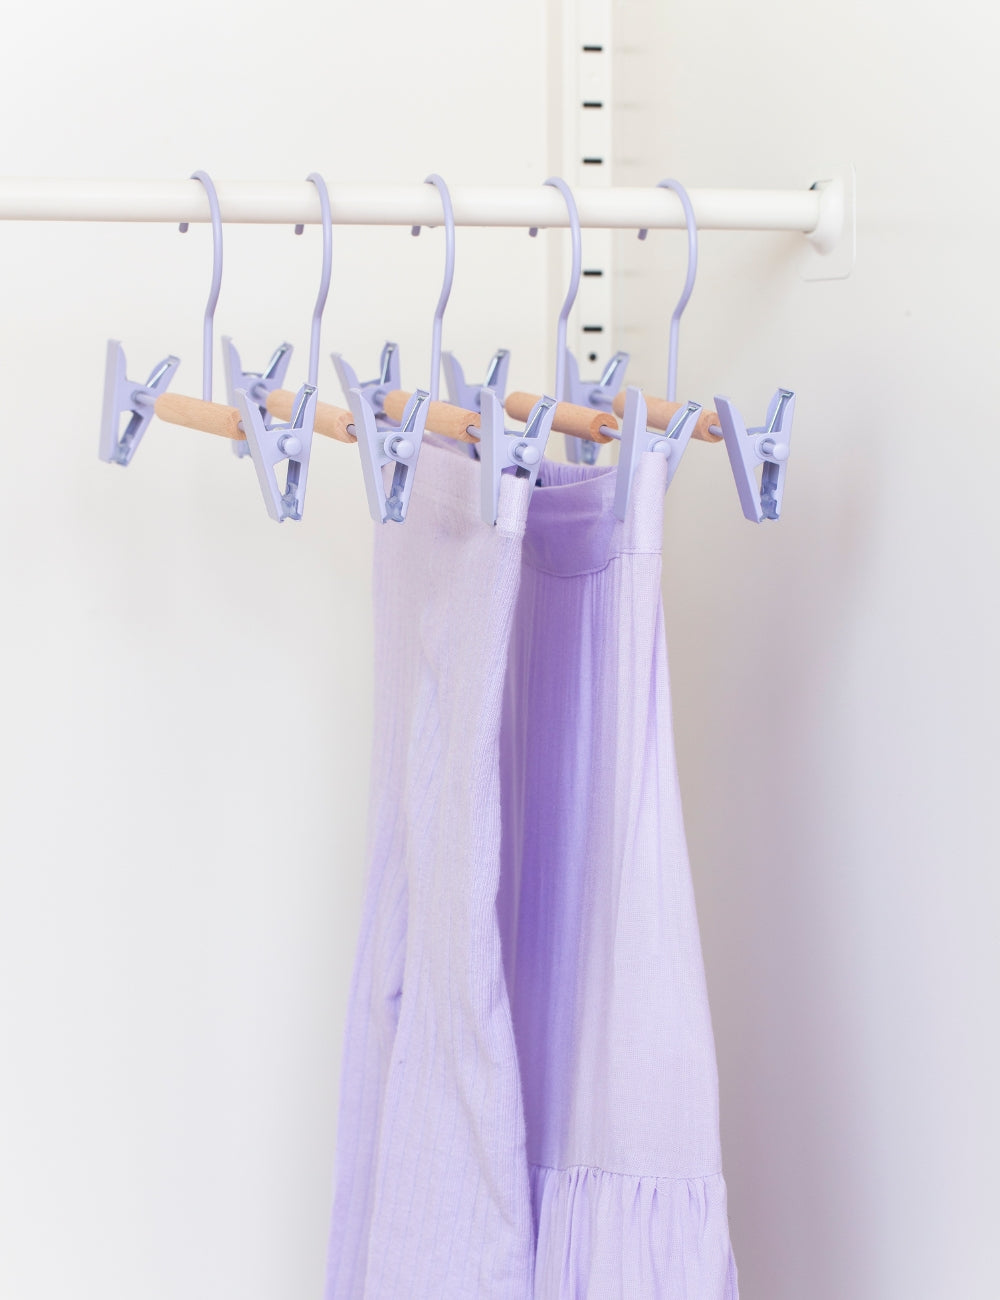 Kids Clip Hangers in Lilac